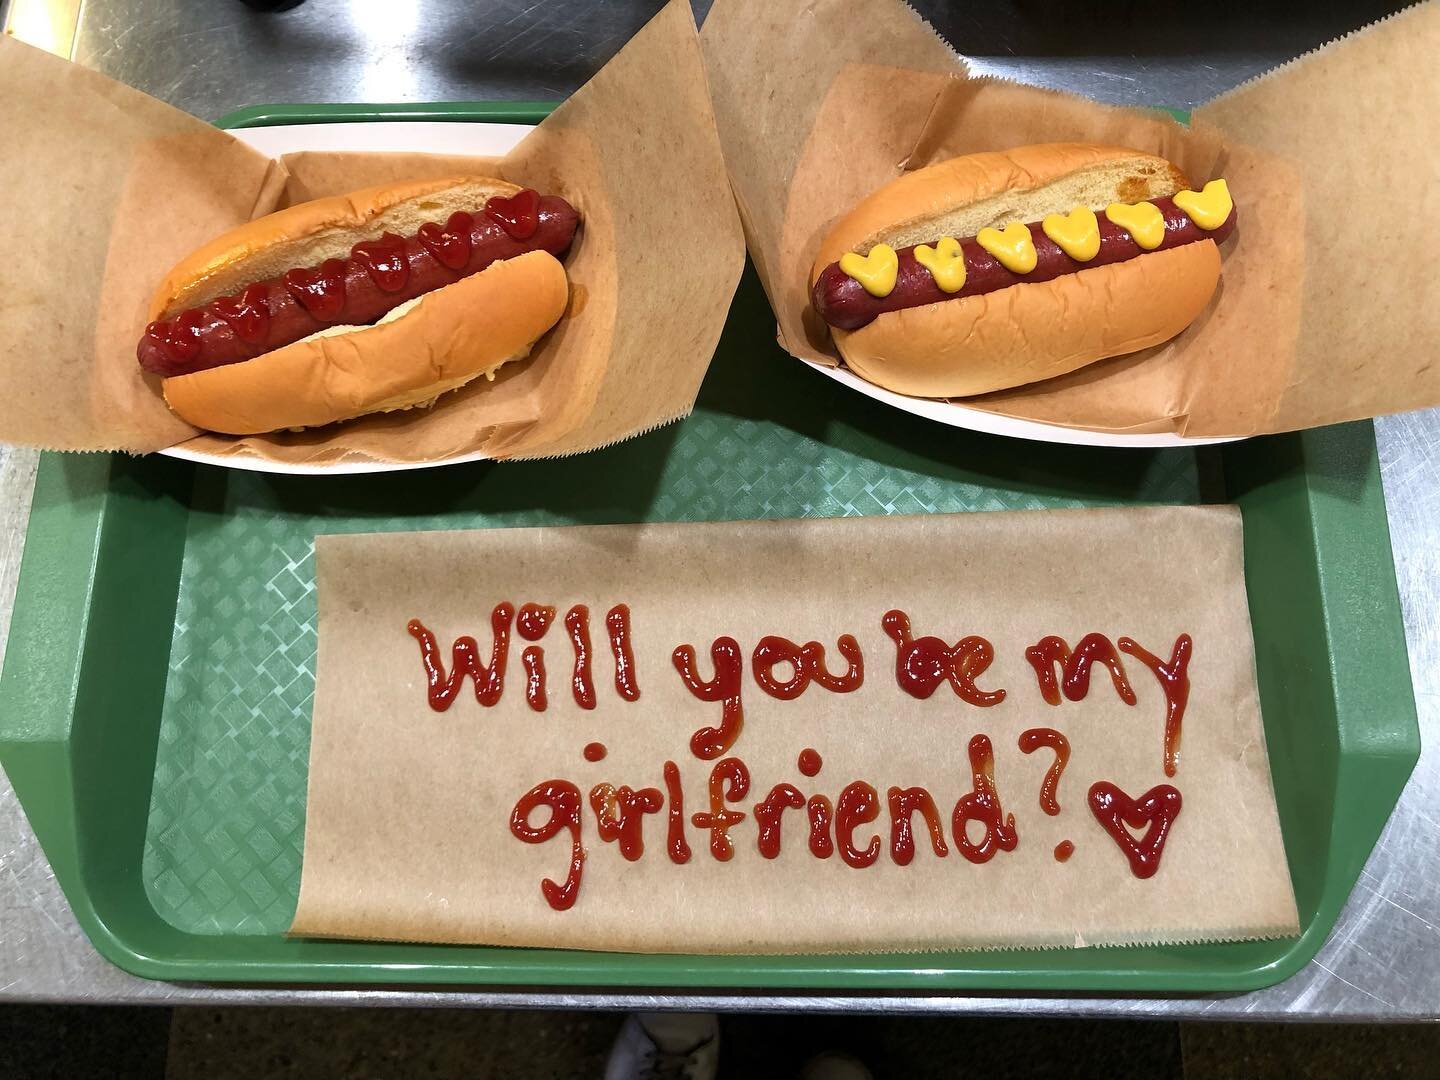 SPOILER ALERT: she said yes! 
&bull;
We love a good special request like this one 🌭 ❤️ 
#hotdogs #hotdoglovers #letuscateryourwedding #loveisintheair